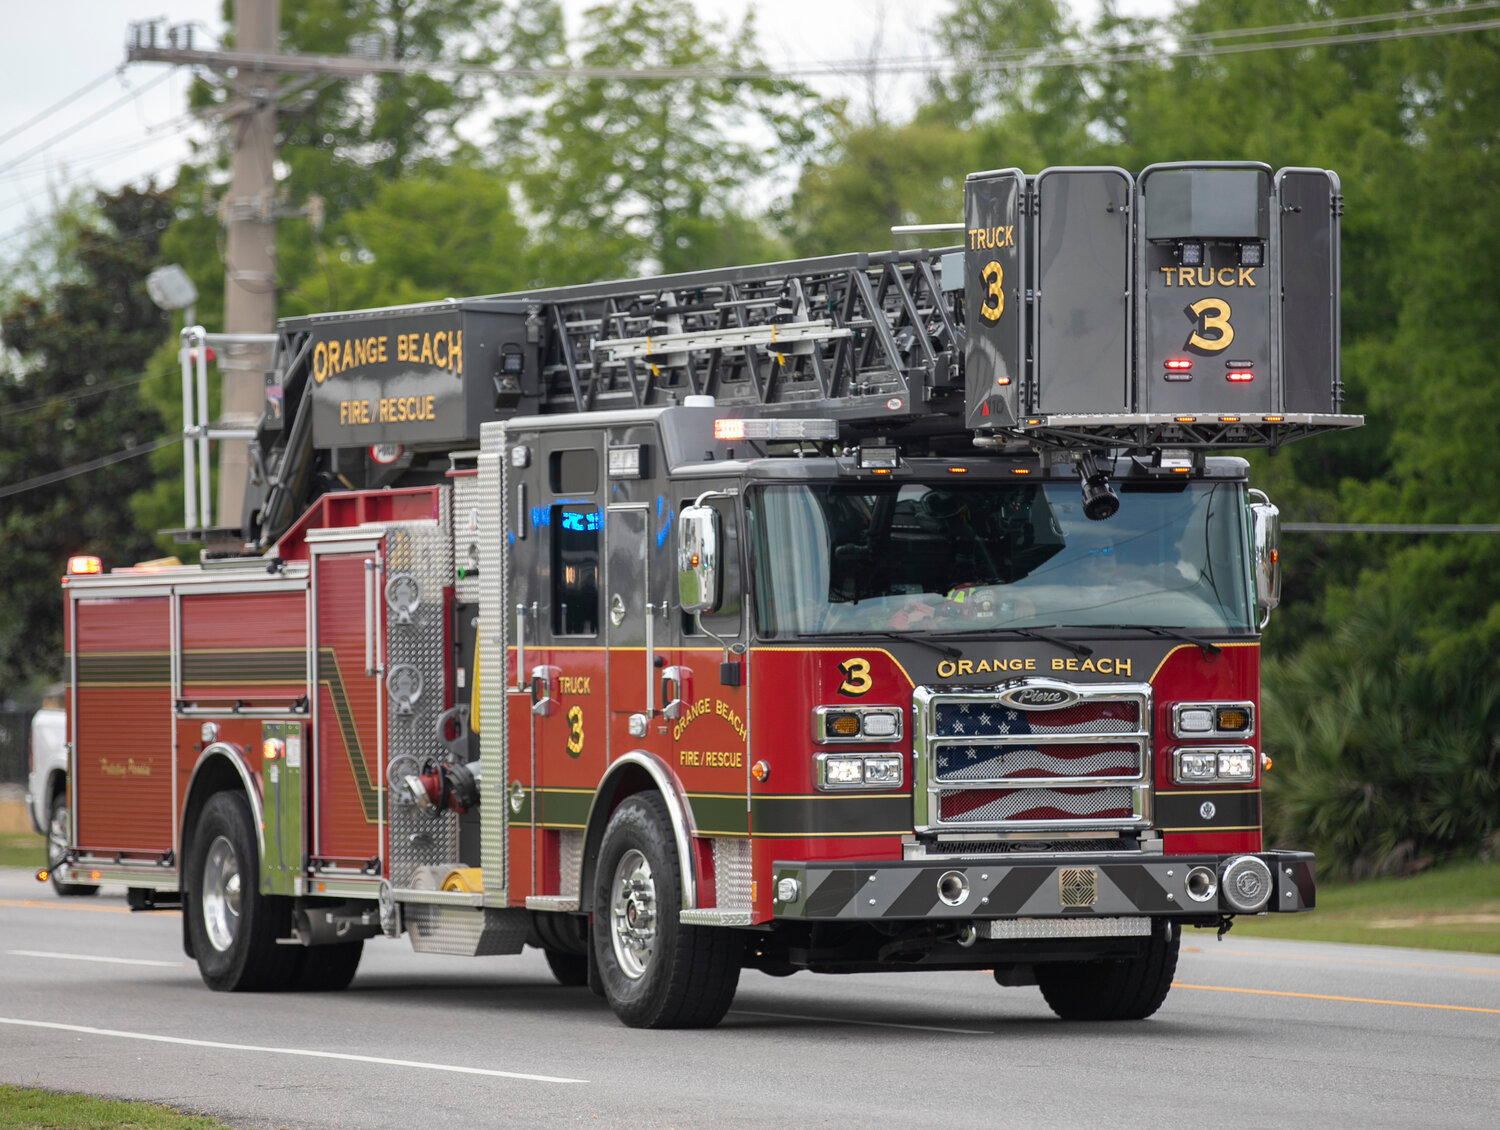 Orange Beach first responders provided an escort for the Mako softball team back to the high school on their return trip from the AHSAA state tournament in Oxford Sunday, May 21. The fire engine that led the way for the three-time state champions was none other than the #3.